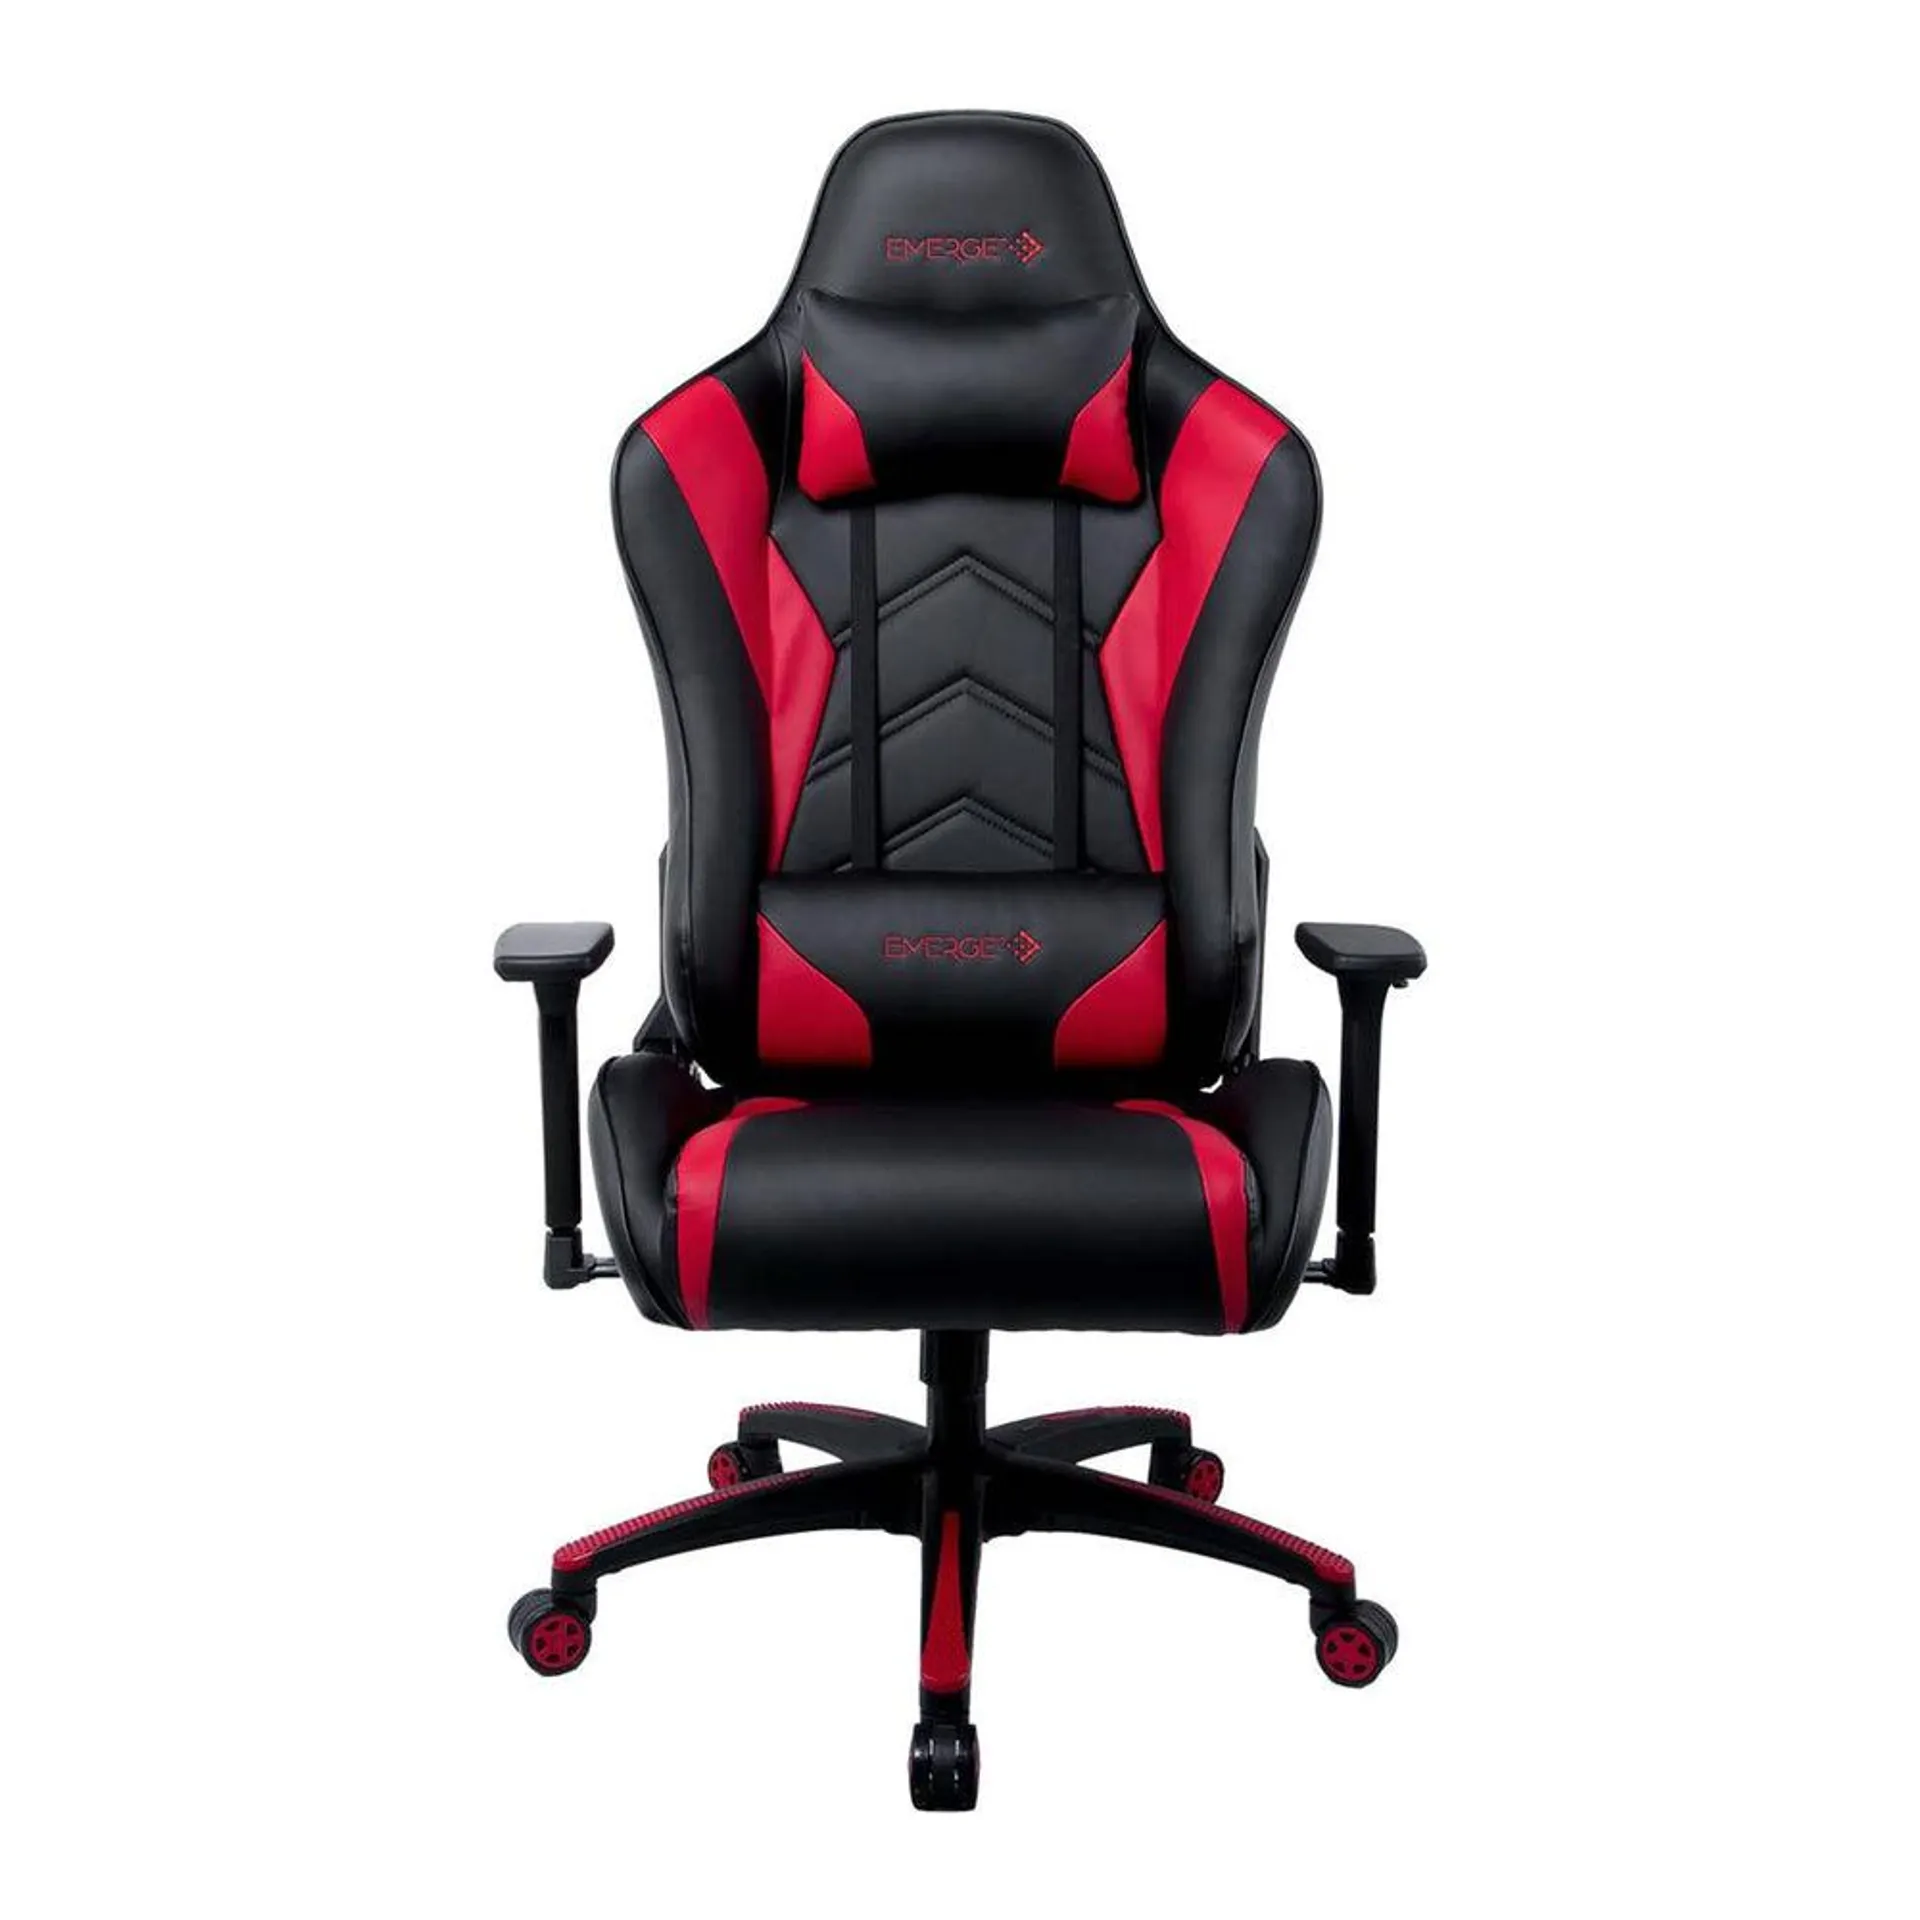 Emerge Vartan Bonded Leather Gaming Chair - Red